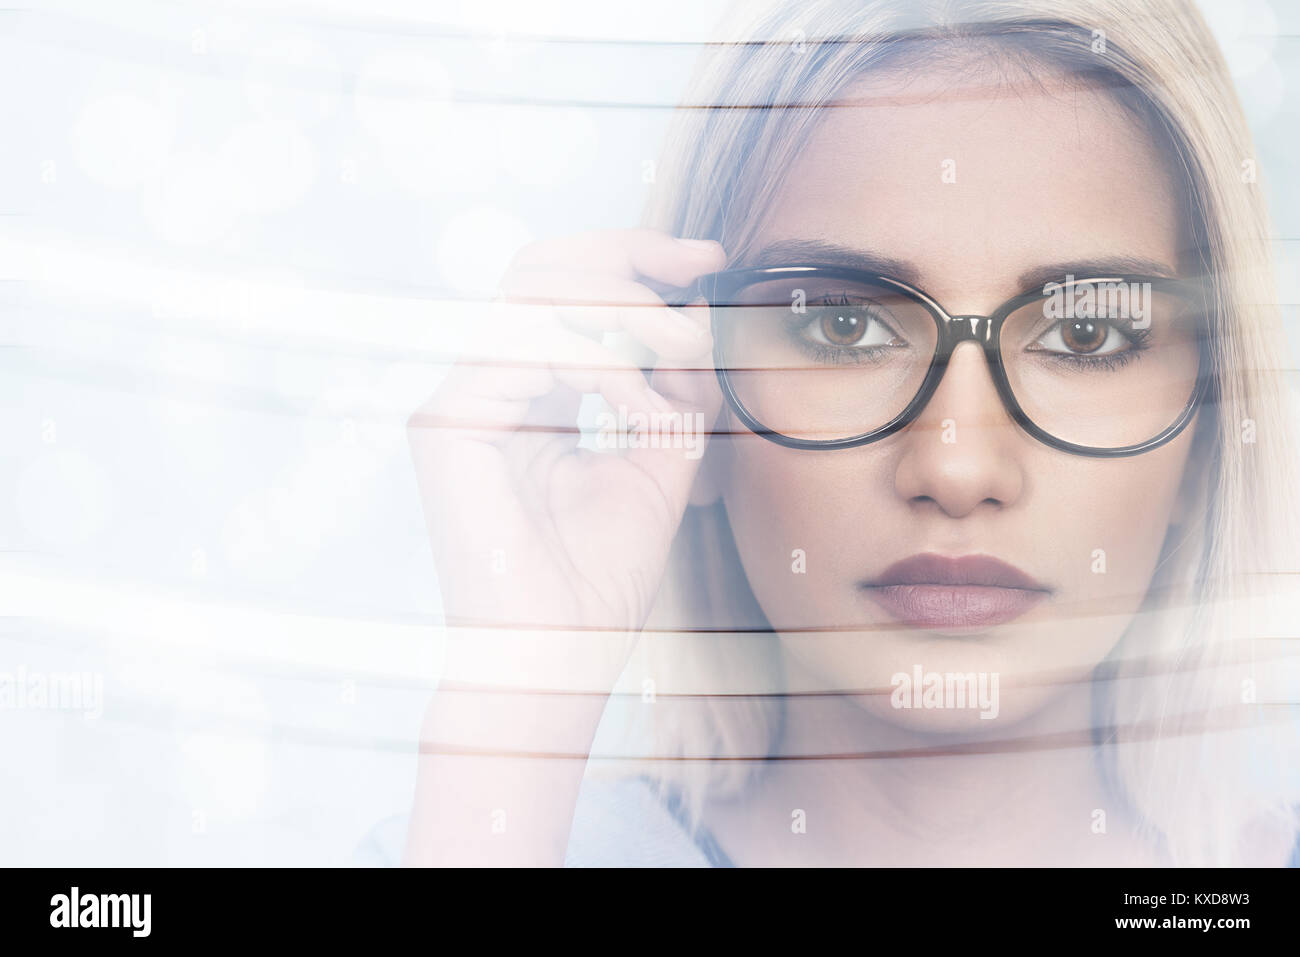 Young attractive woman wearing glasses Stock Photo by ©AVFC 90806098